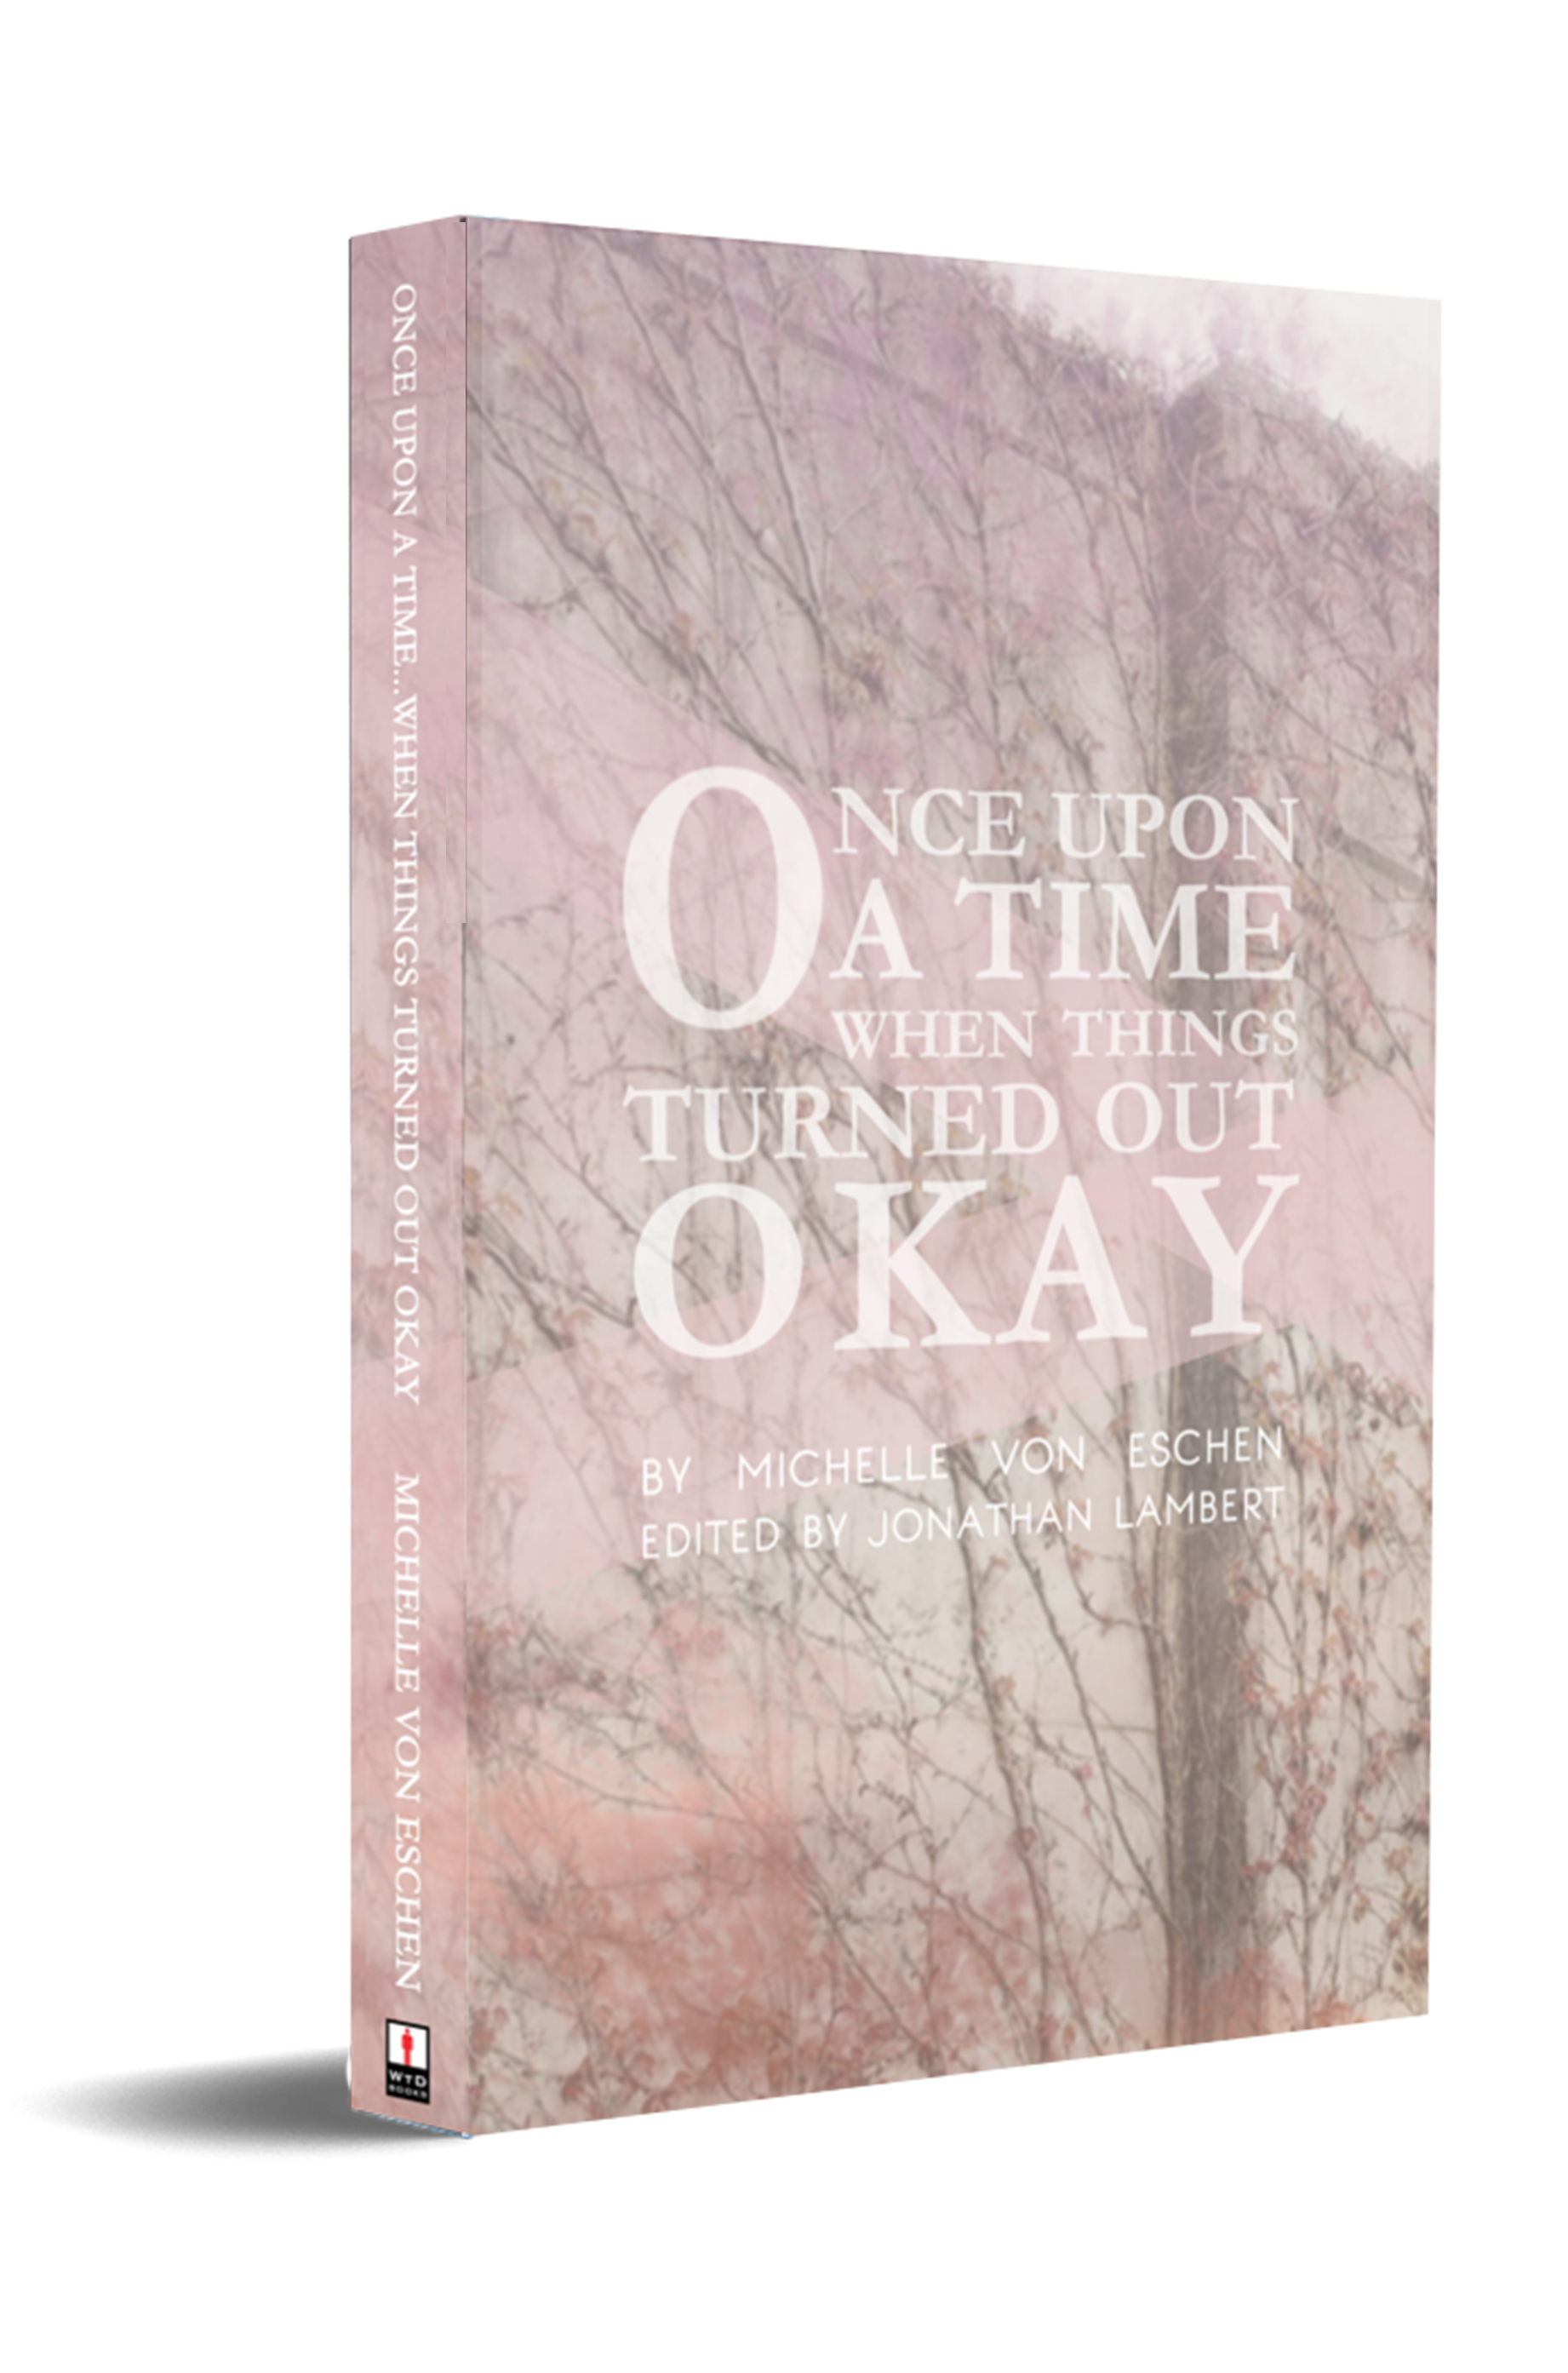 Once Upon a Time, When Things Turned Out Okay book cover